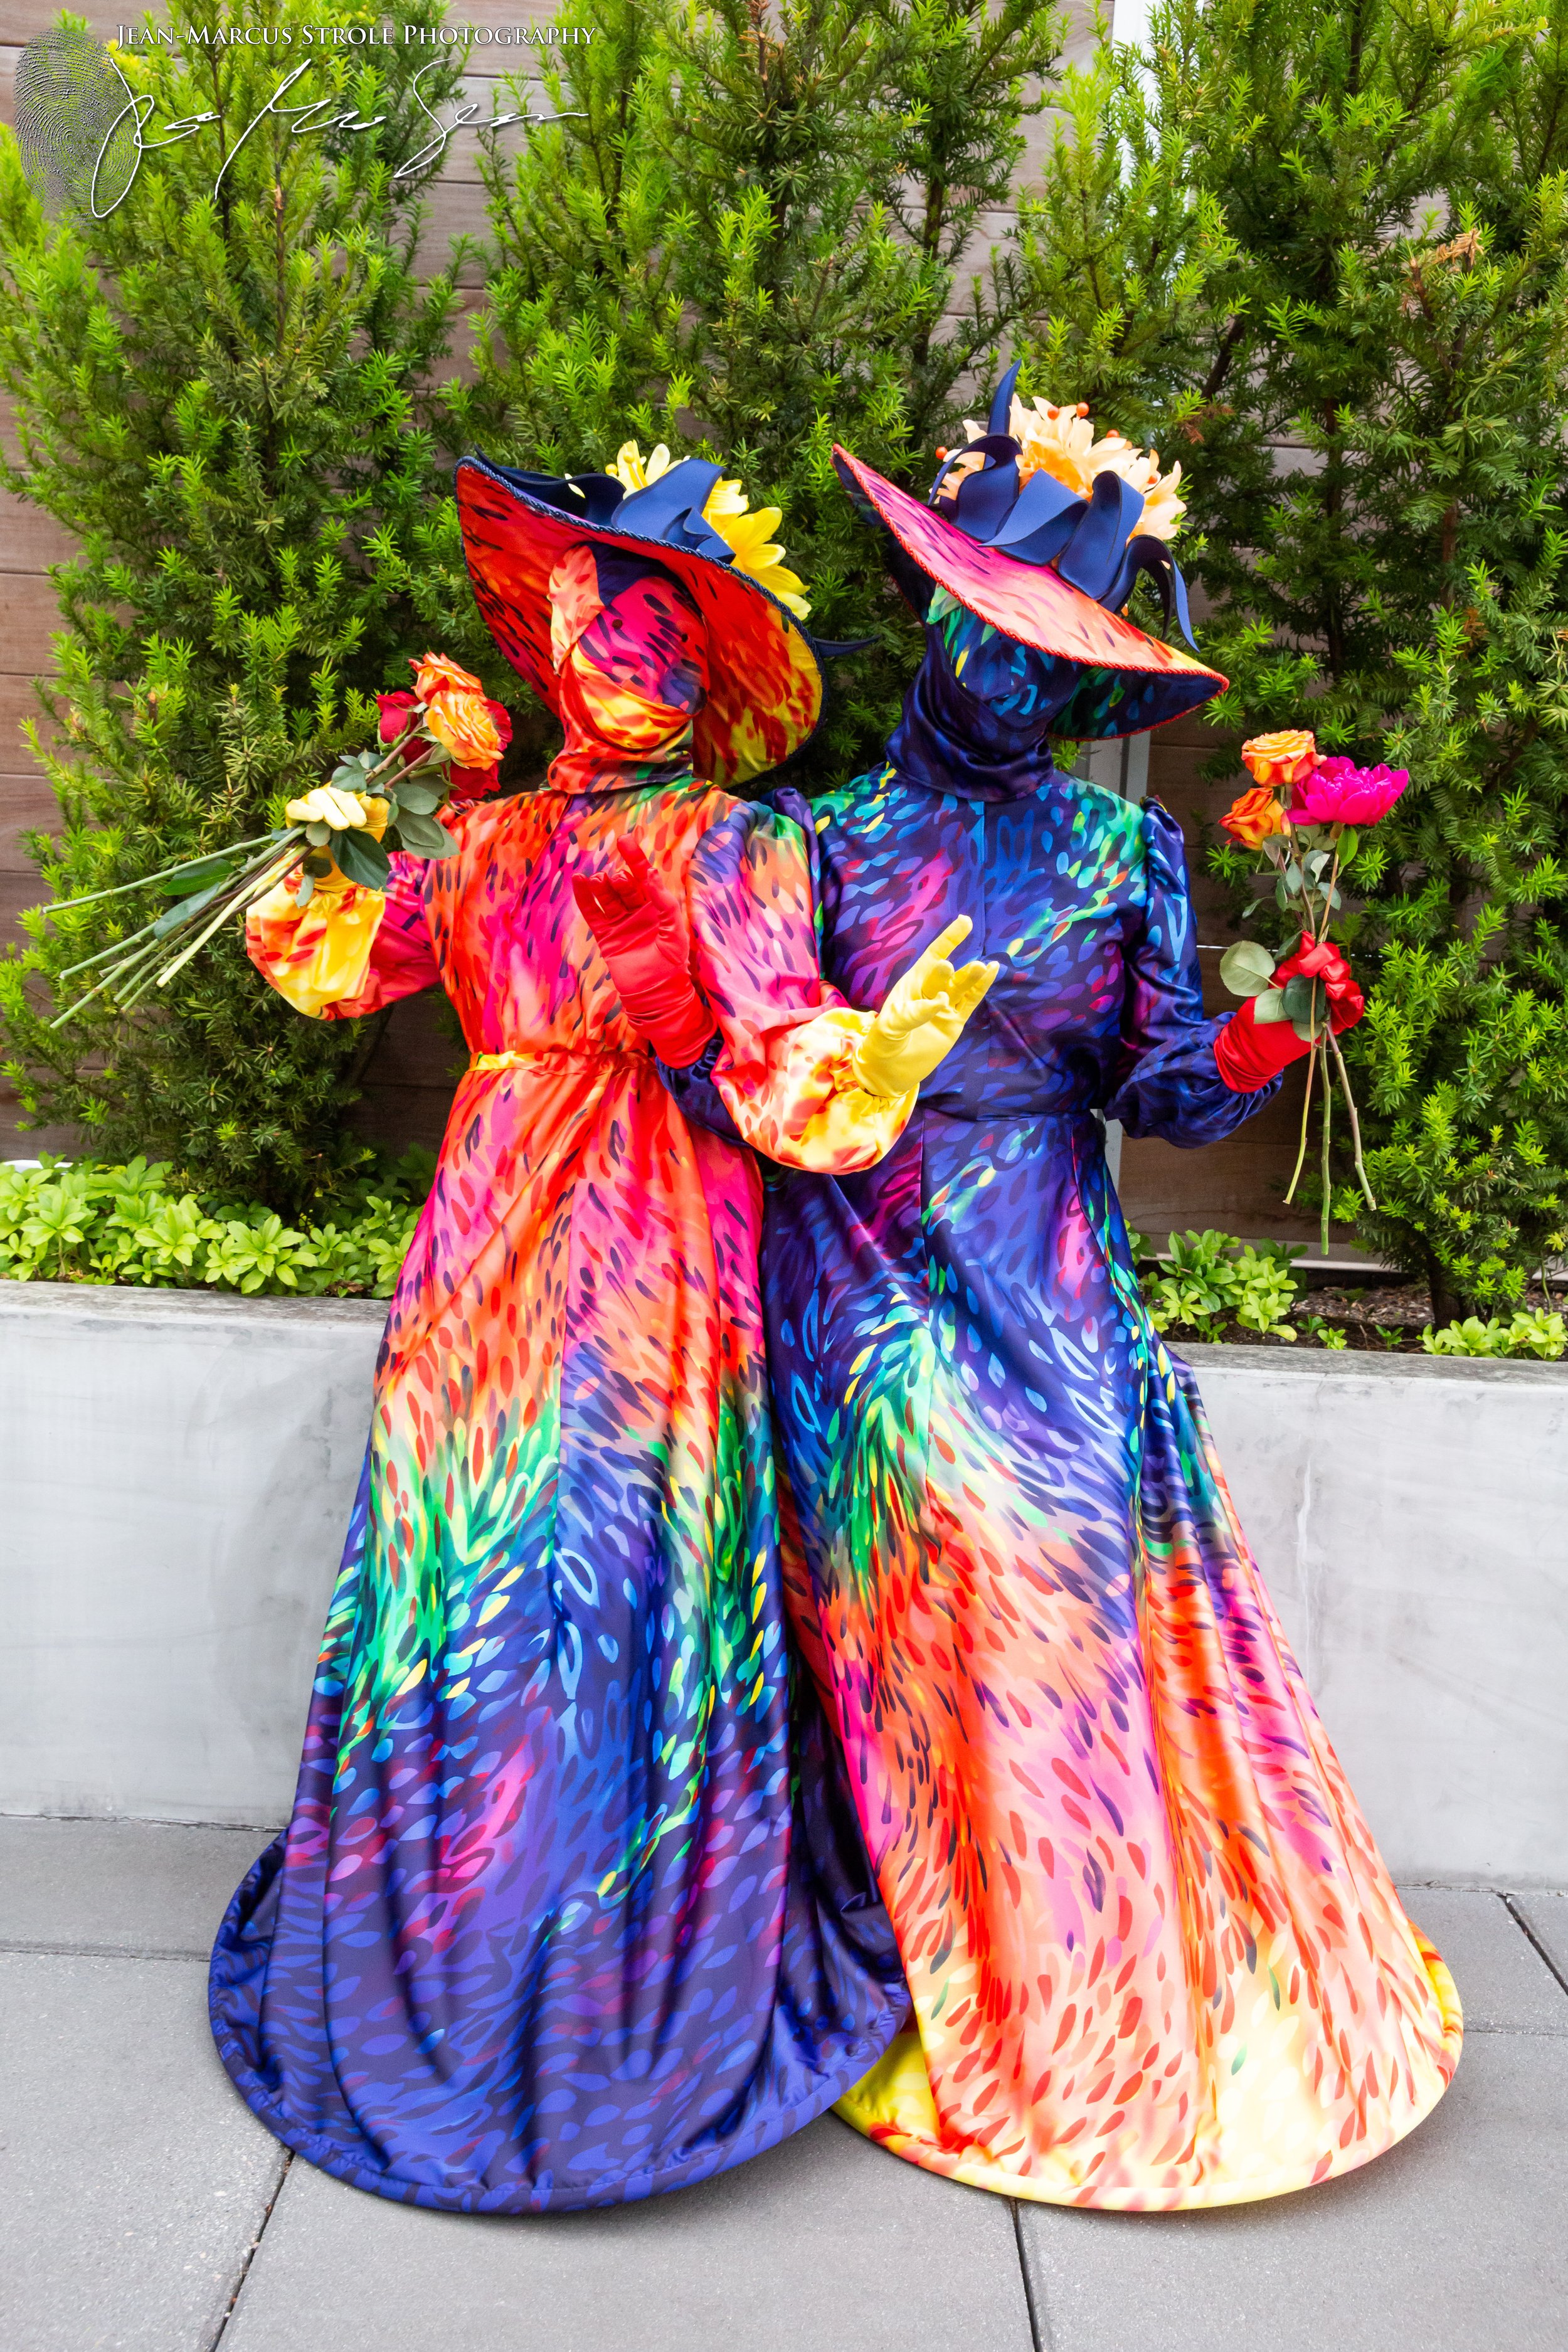 Rainbow Floral Living Statues - Photo Credit Jean Marcus Strole